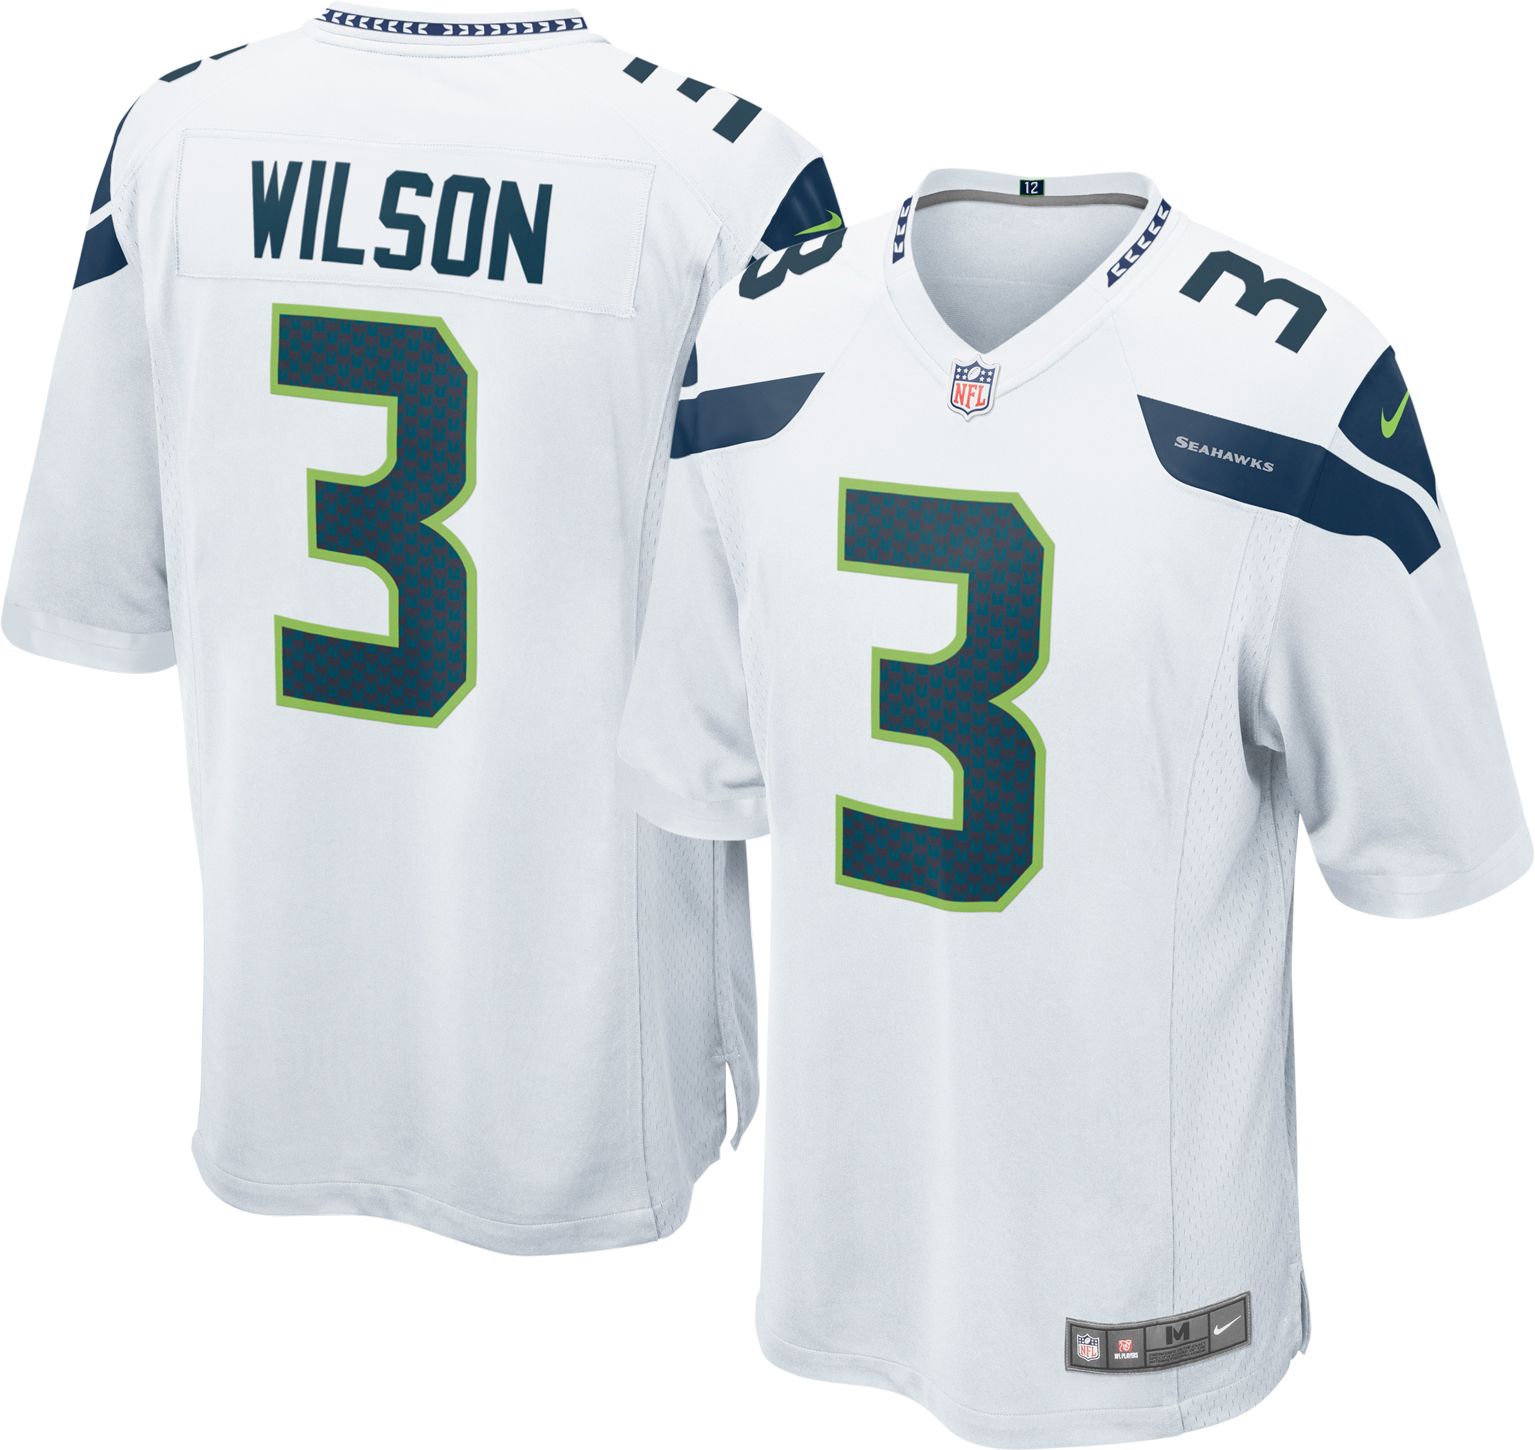 russell wilson youth jersey small